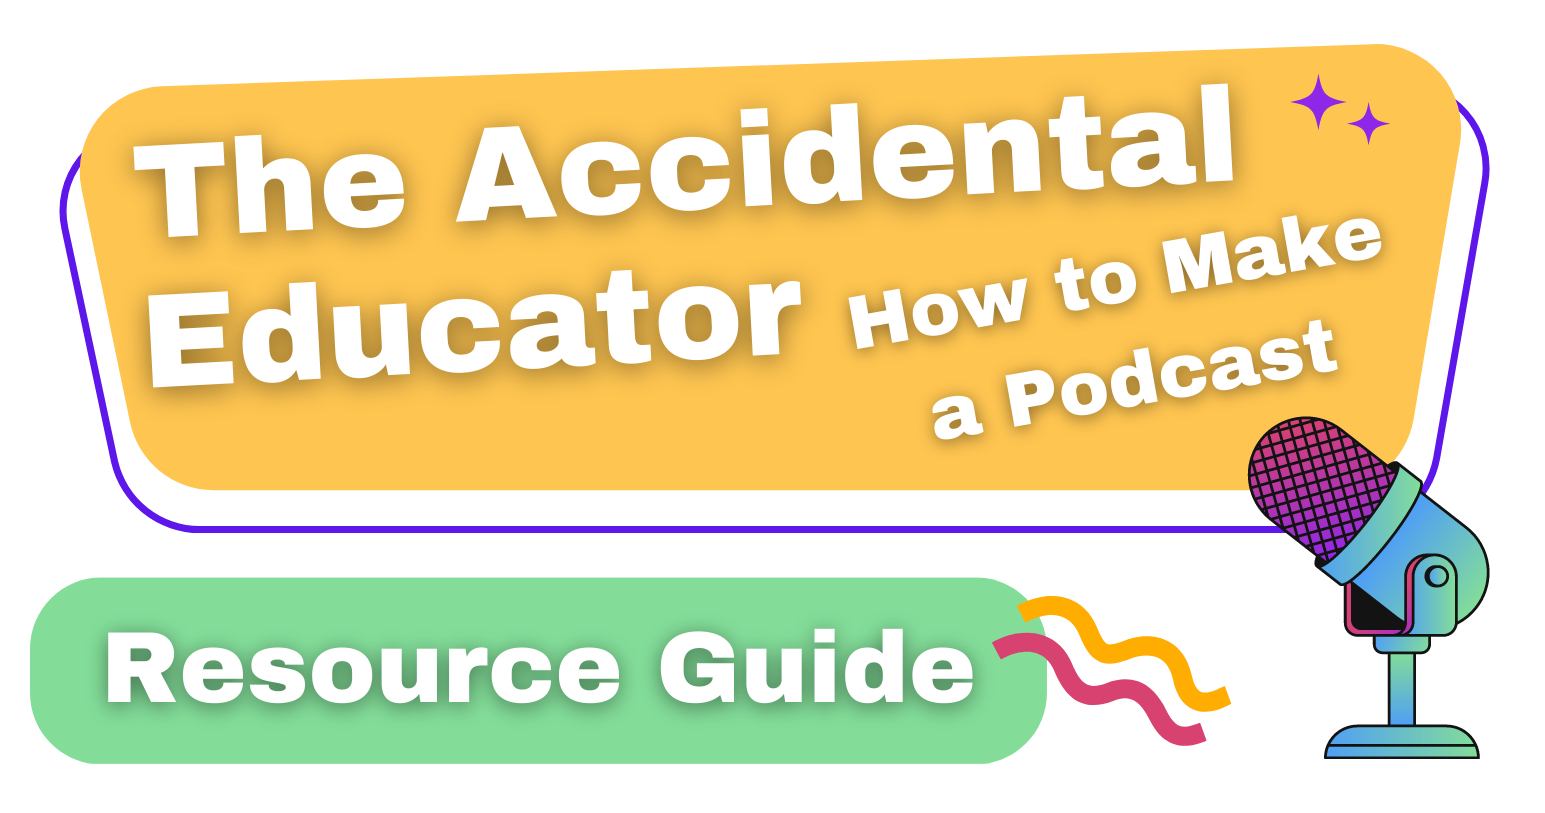 The Accidental Educator Resource Guide: How to Make a Podcast